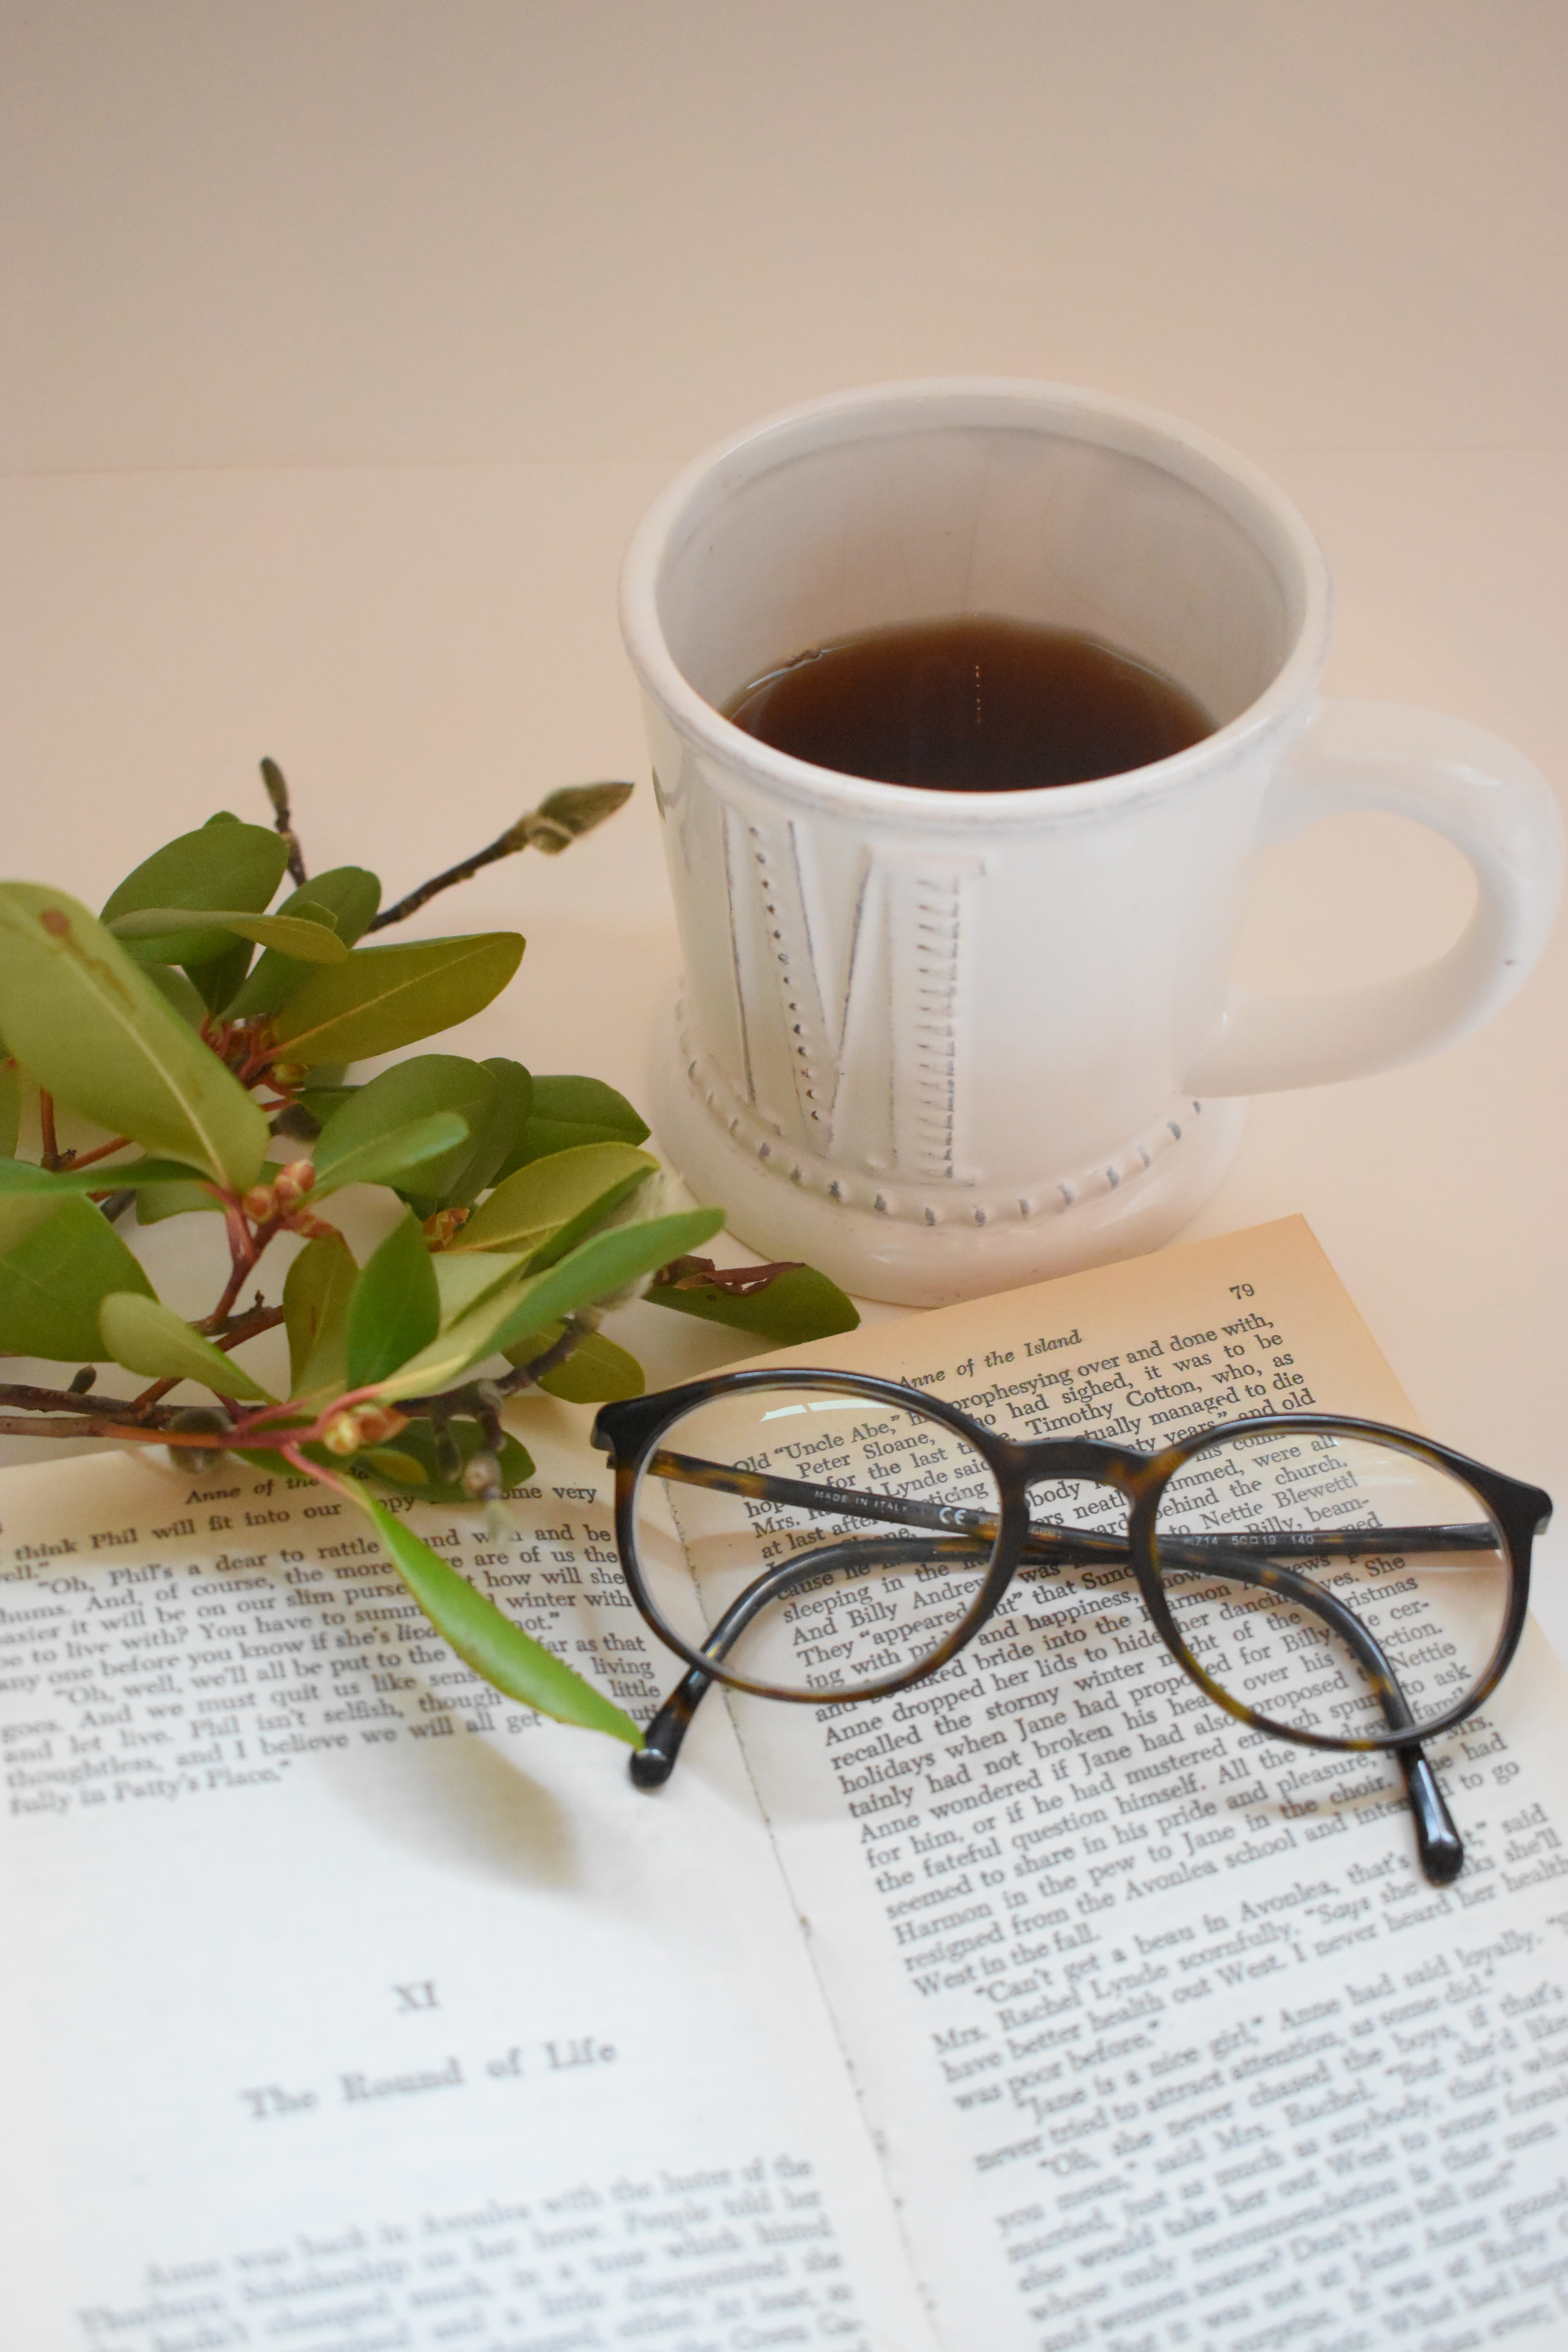 spectacles, miscellanea, miscellaneous, cup, book, glasses FHD, 4K, UHD